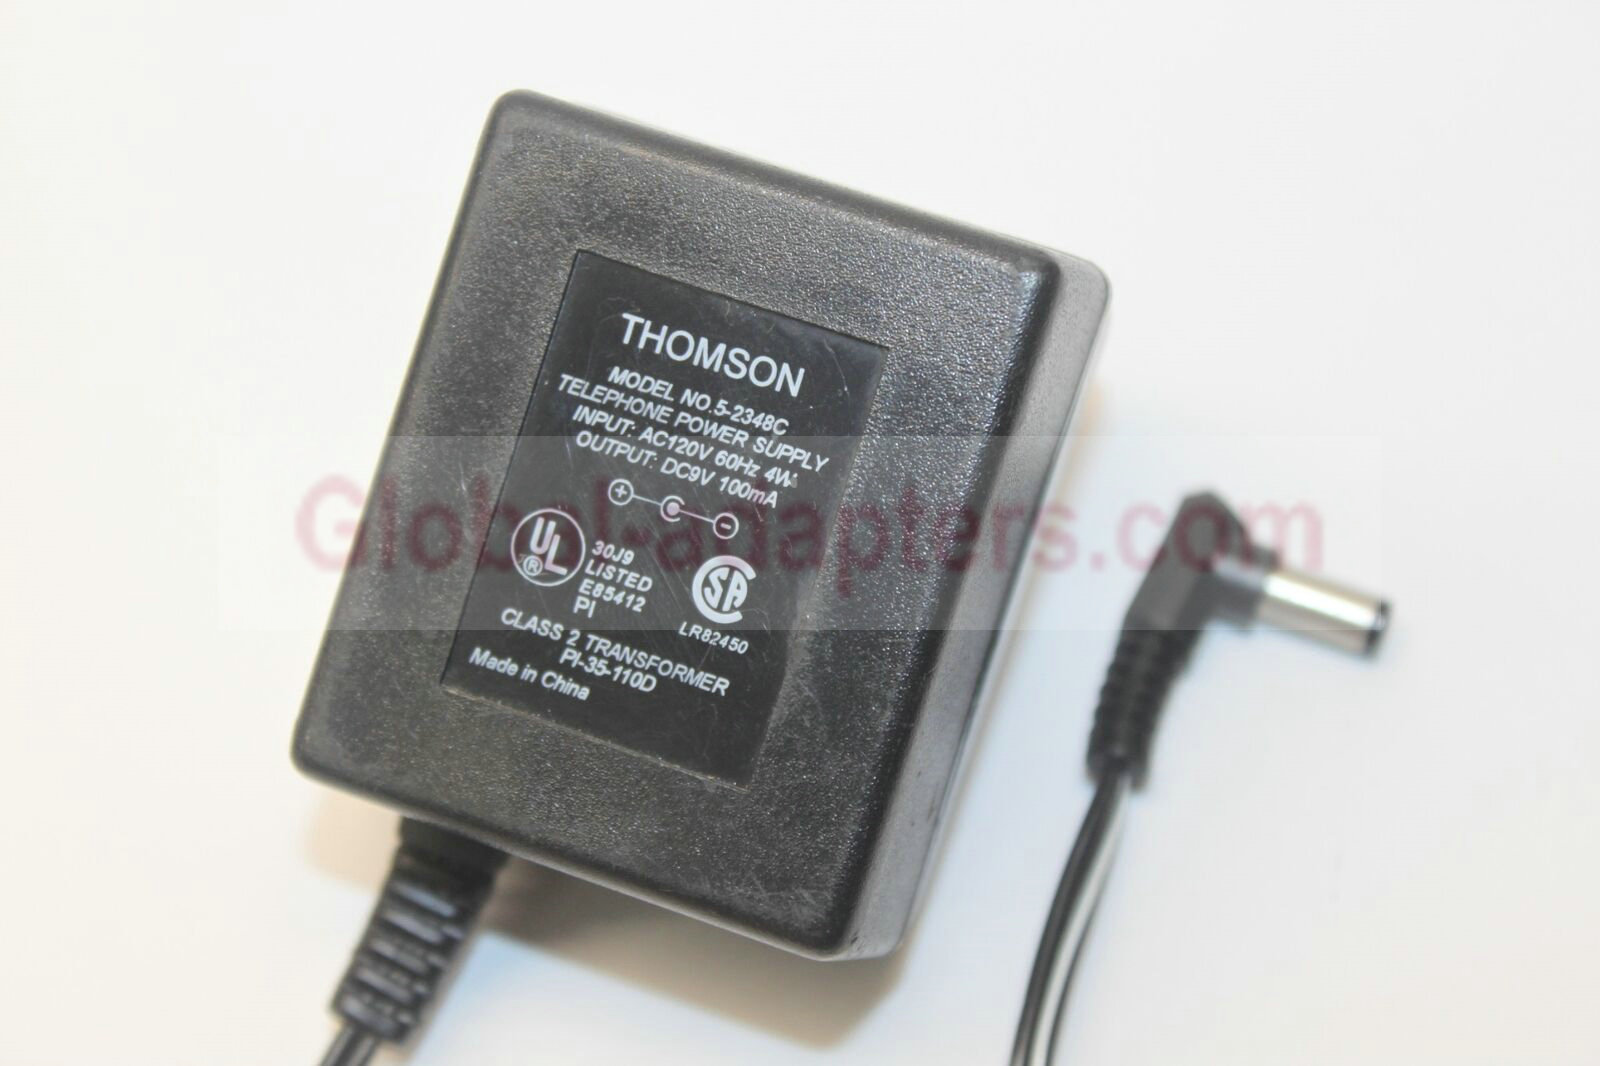 New 9V 100mA 5-2348C Plug-In Class 2 Transformer Power Supply Ac Adapter - Click Image to Close